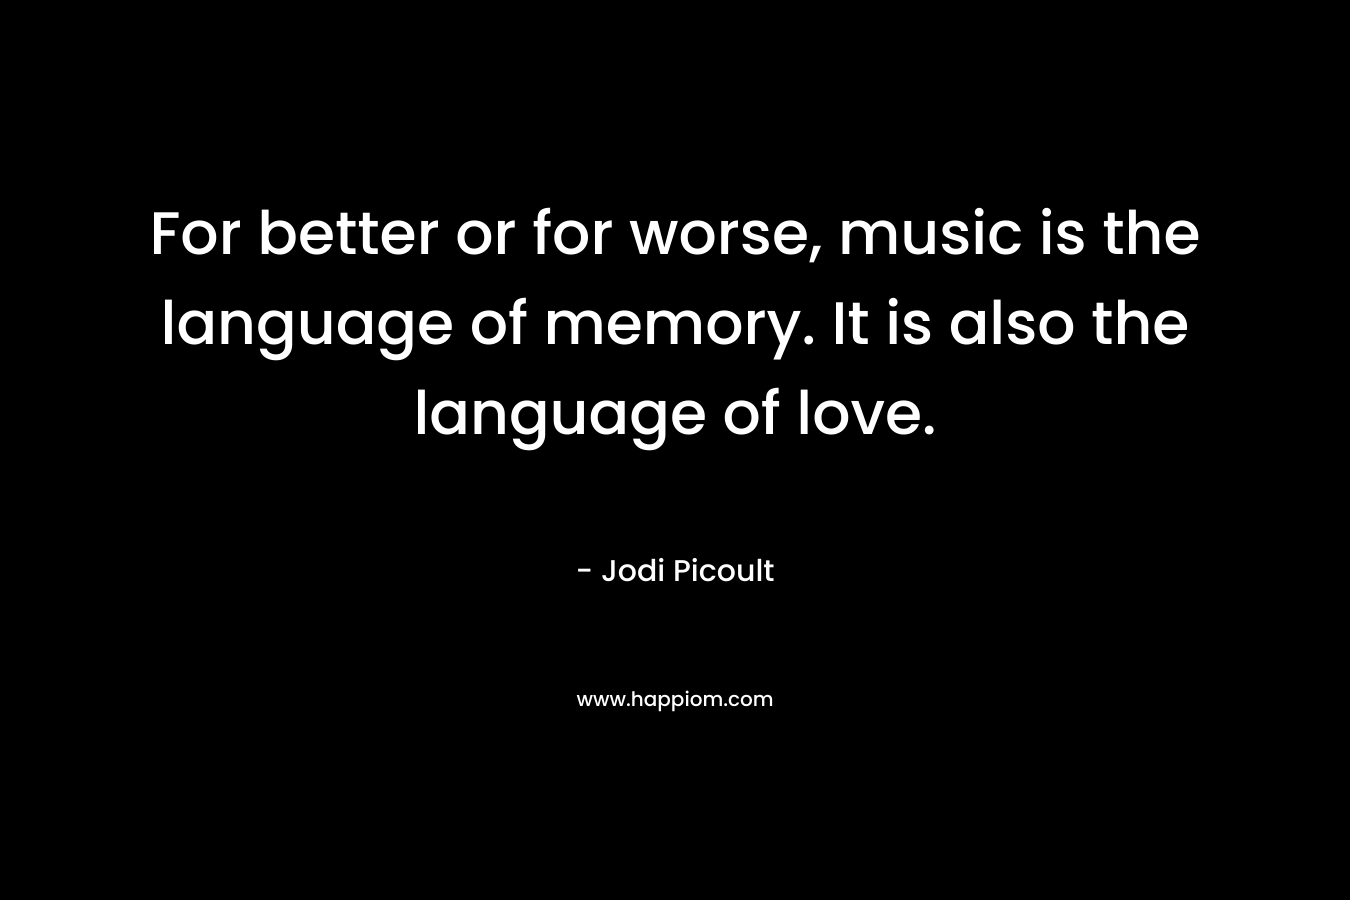 For better or for worse, music is the language of memory. It is also the language of love.